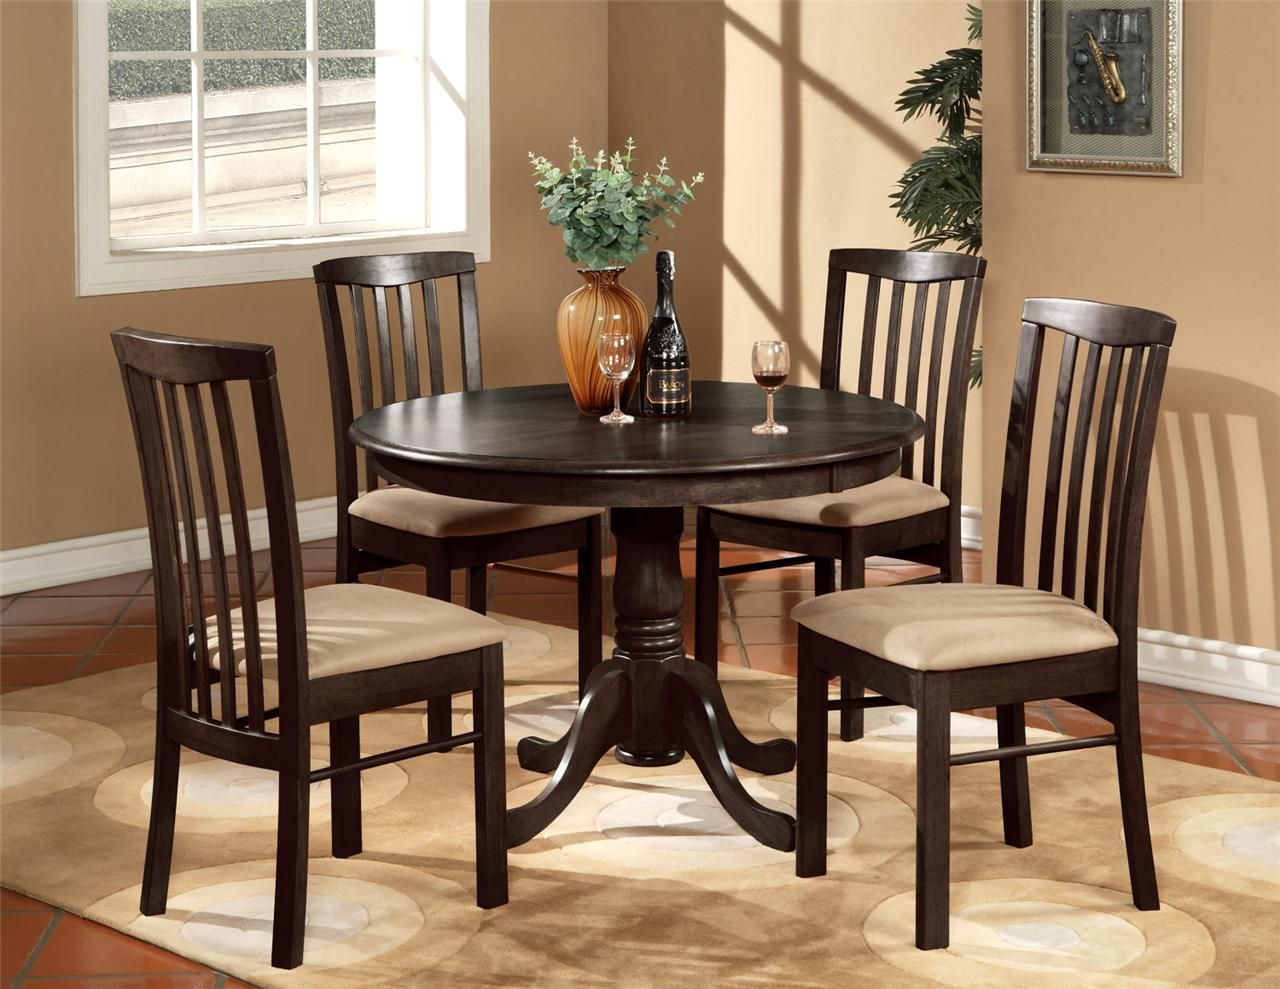 Small Round Kitchen Table Set
 dark wood round counter height kitchen table and 4 chirs